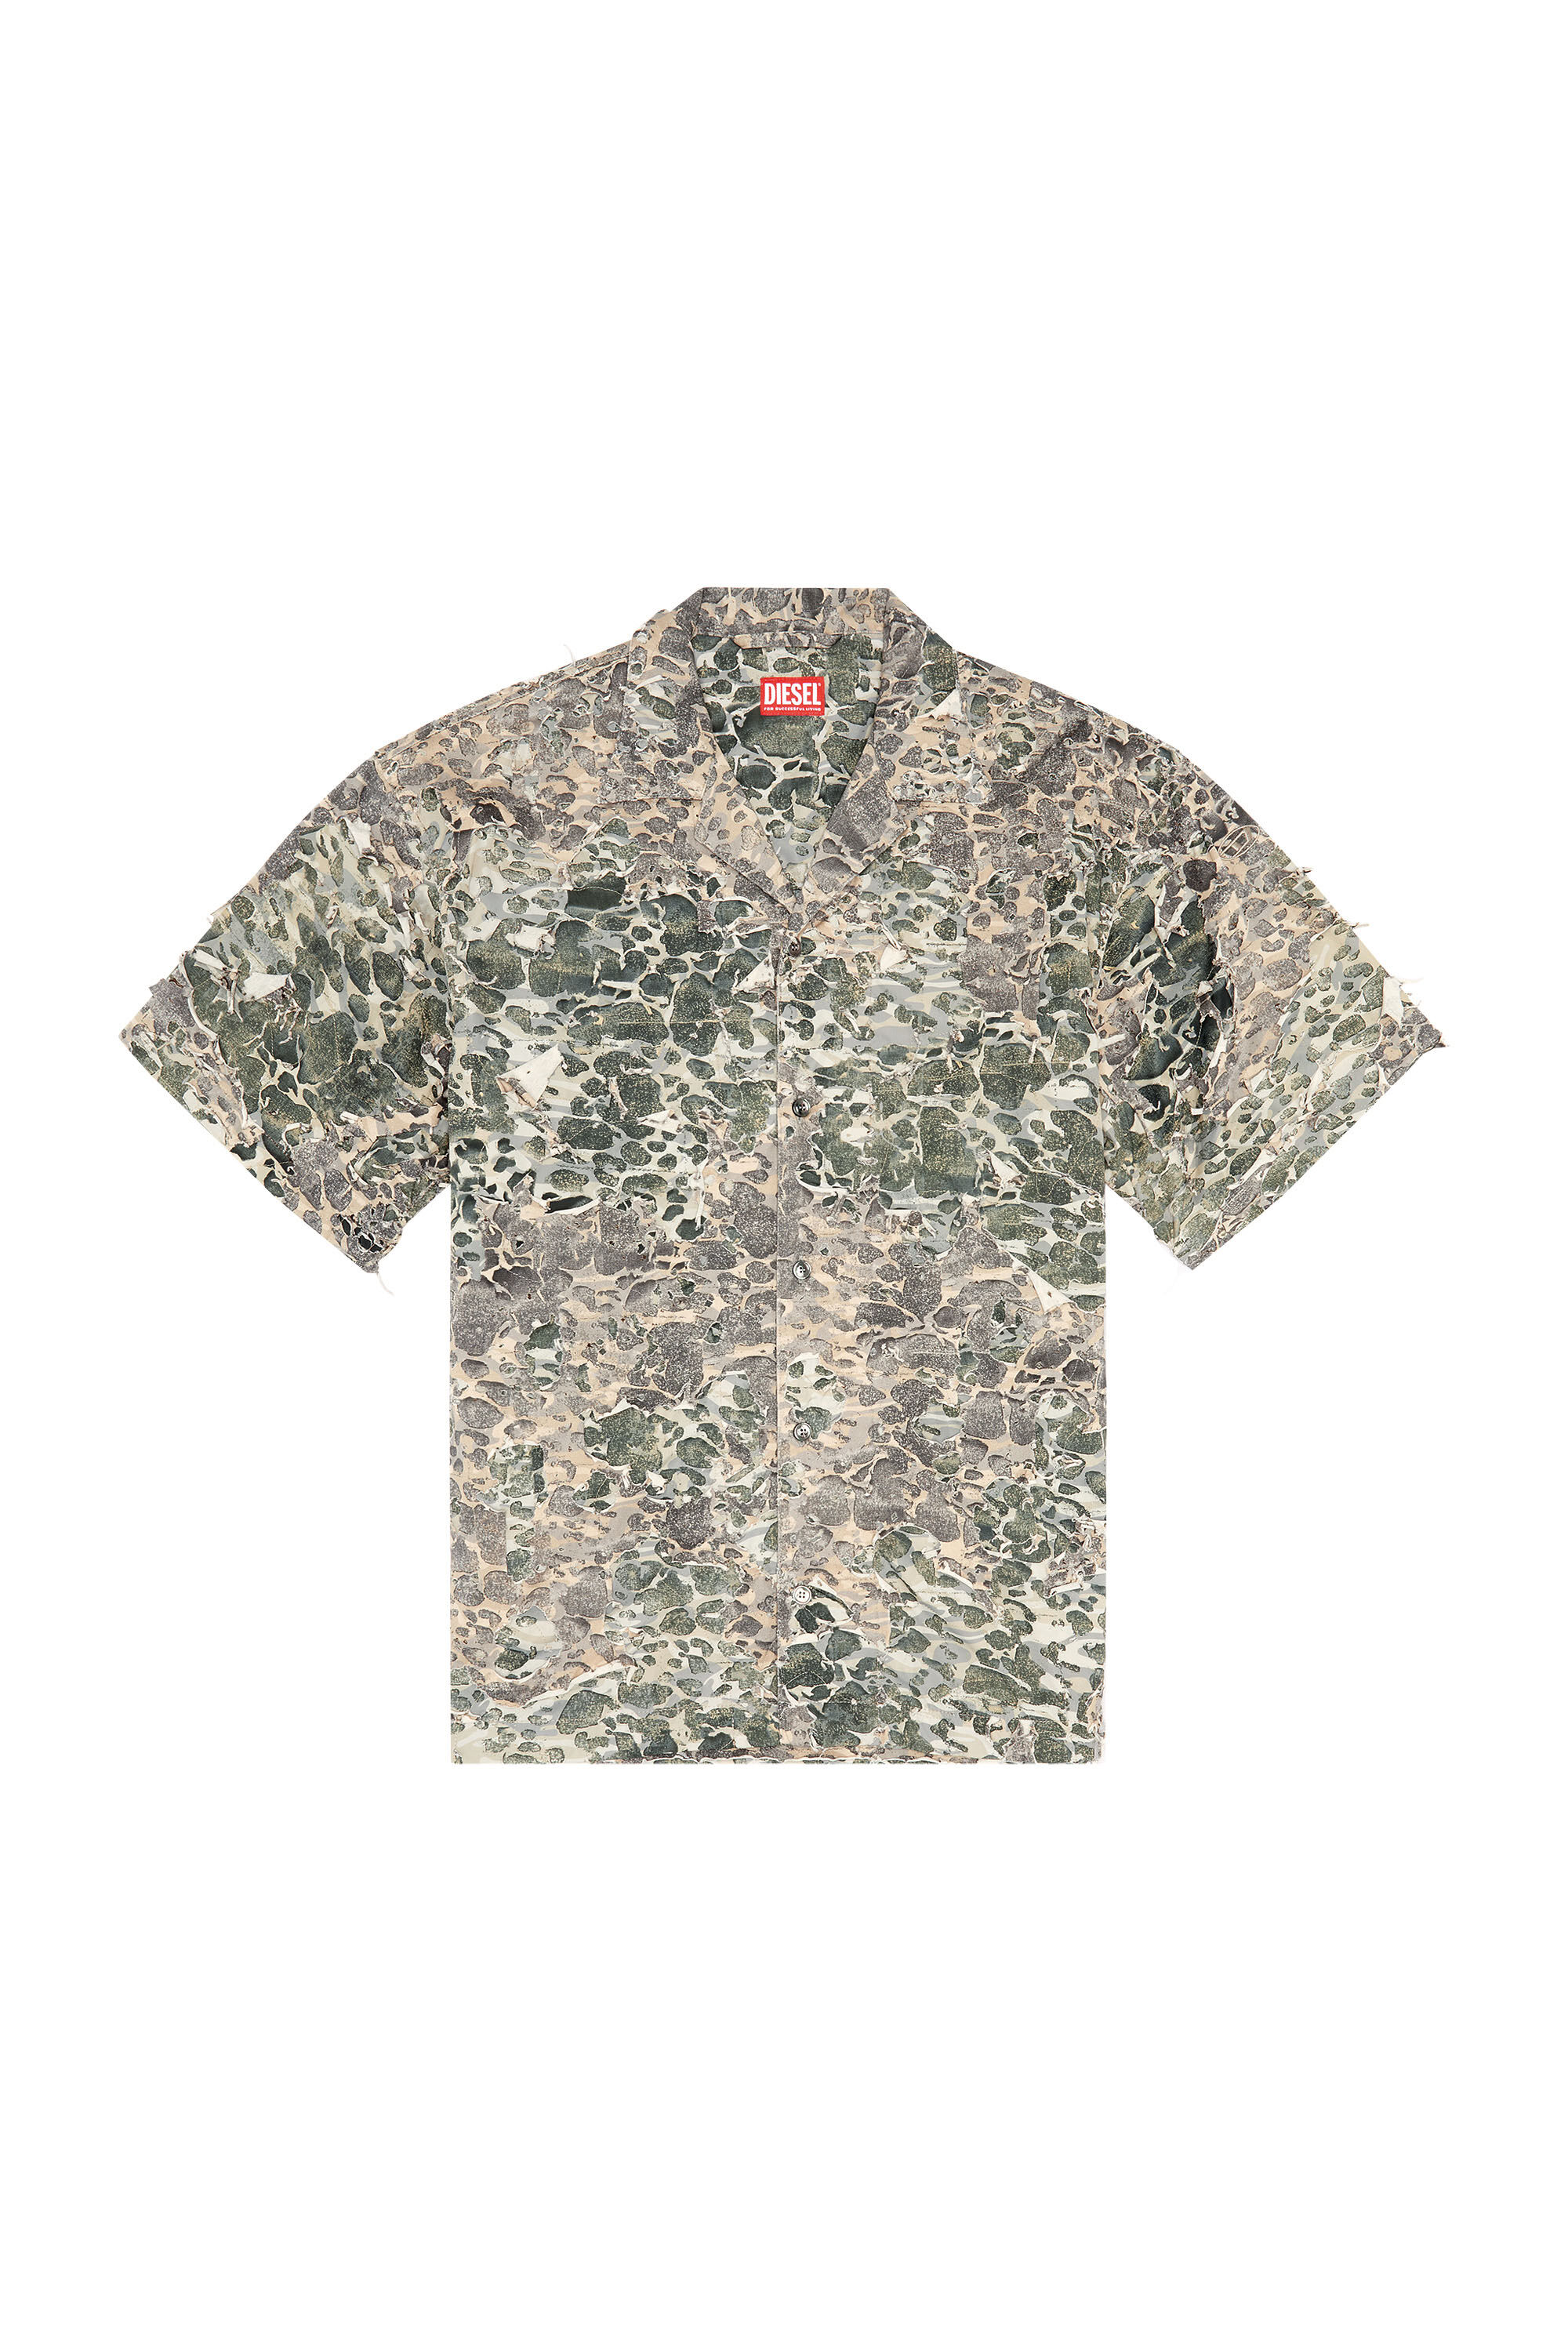 Diesel - S-HOCKNEY-CAMU, Male Camo shirt with destroyed finish in マルチカラー - Image 2